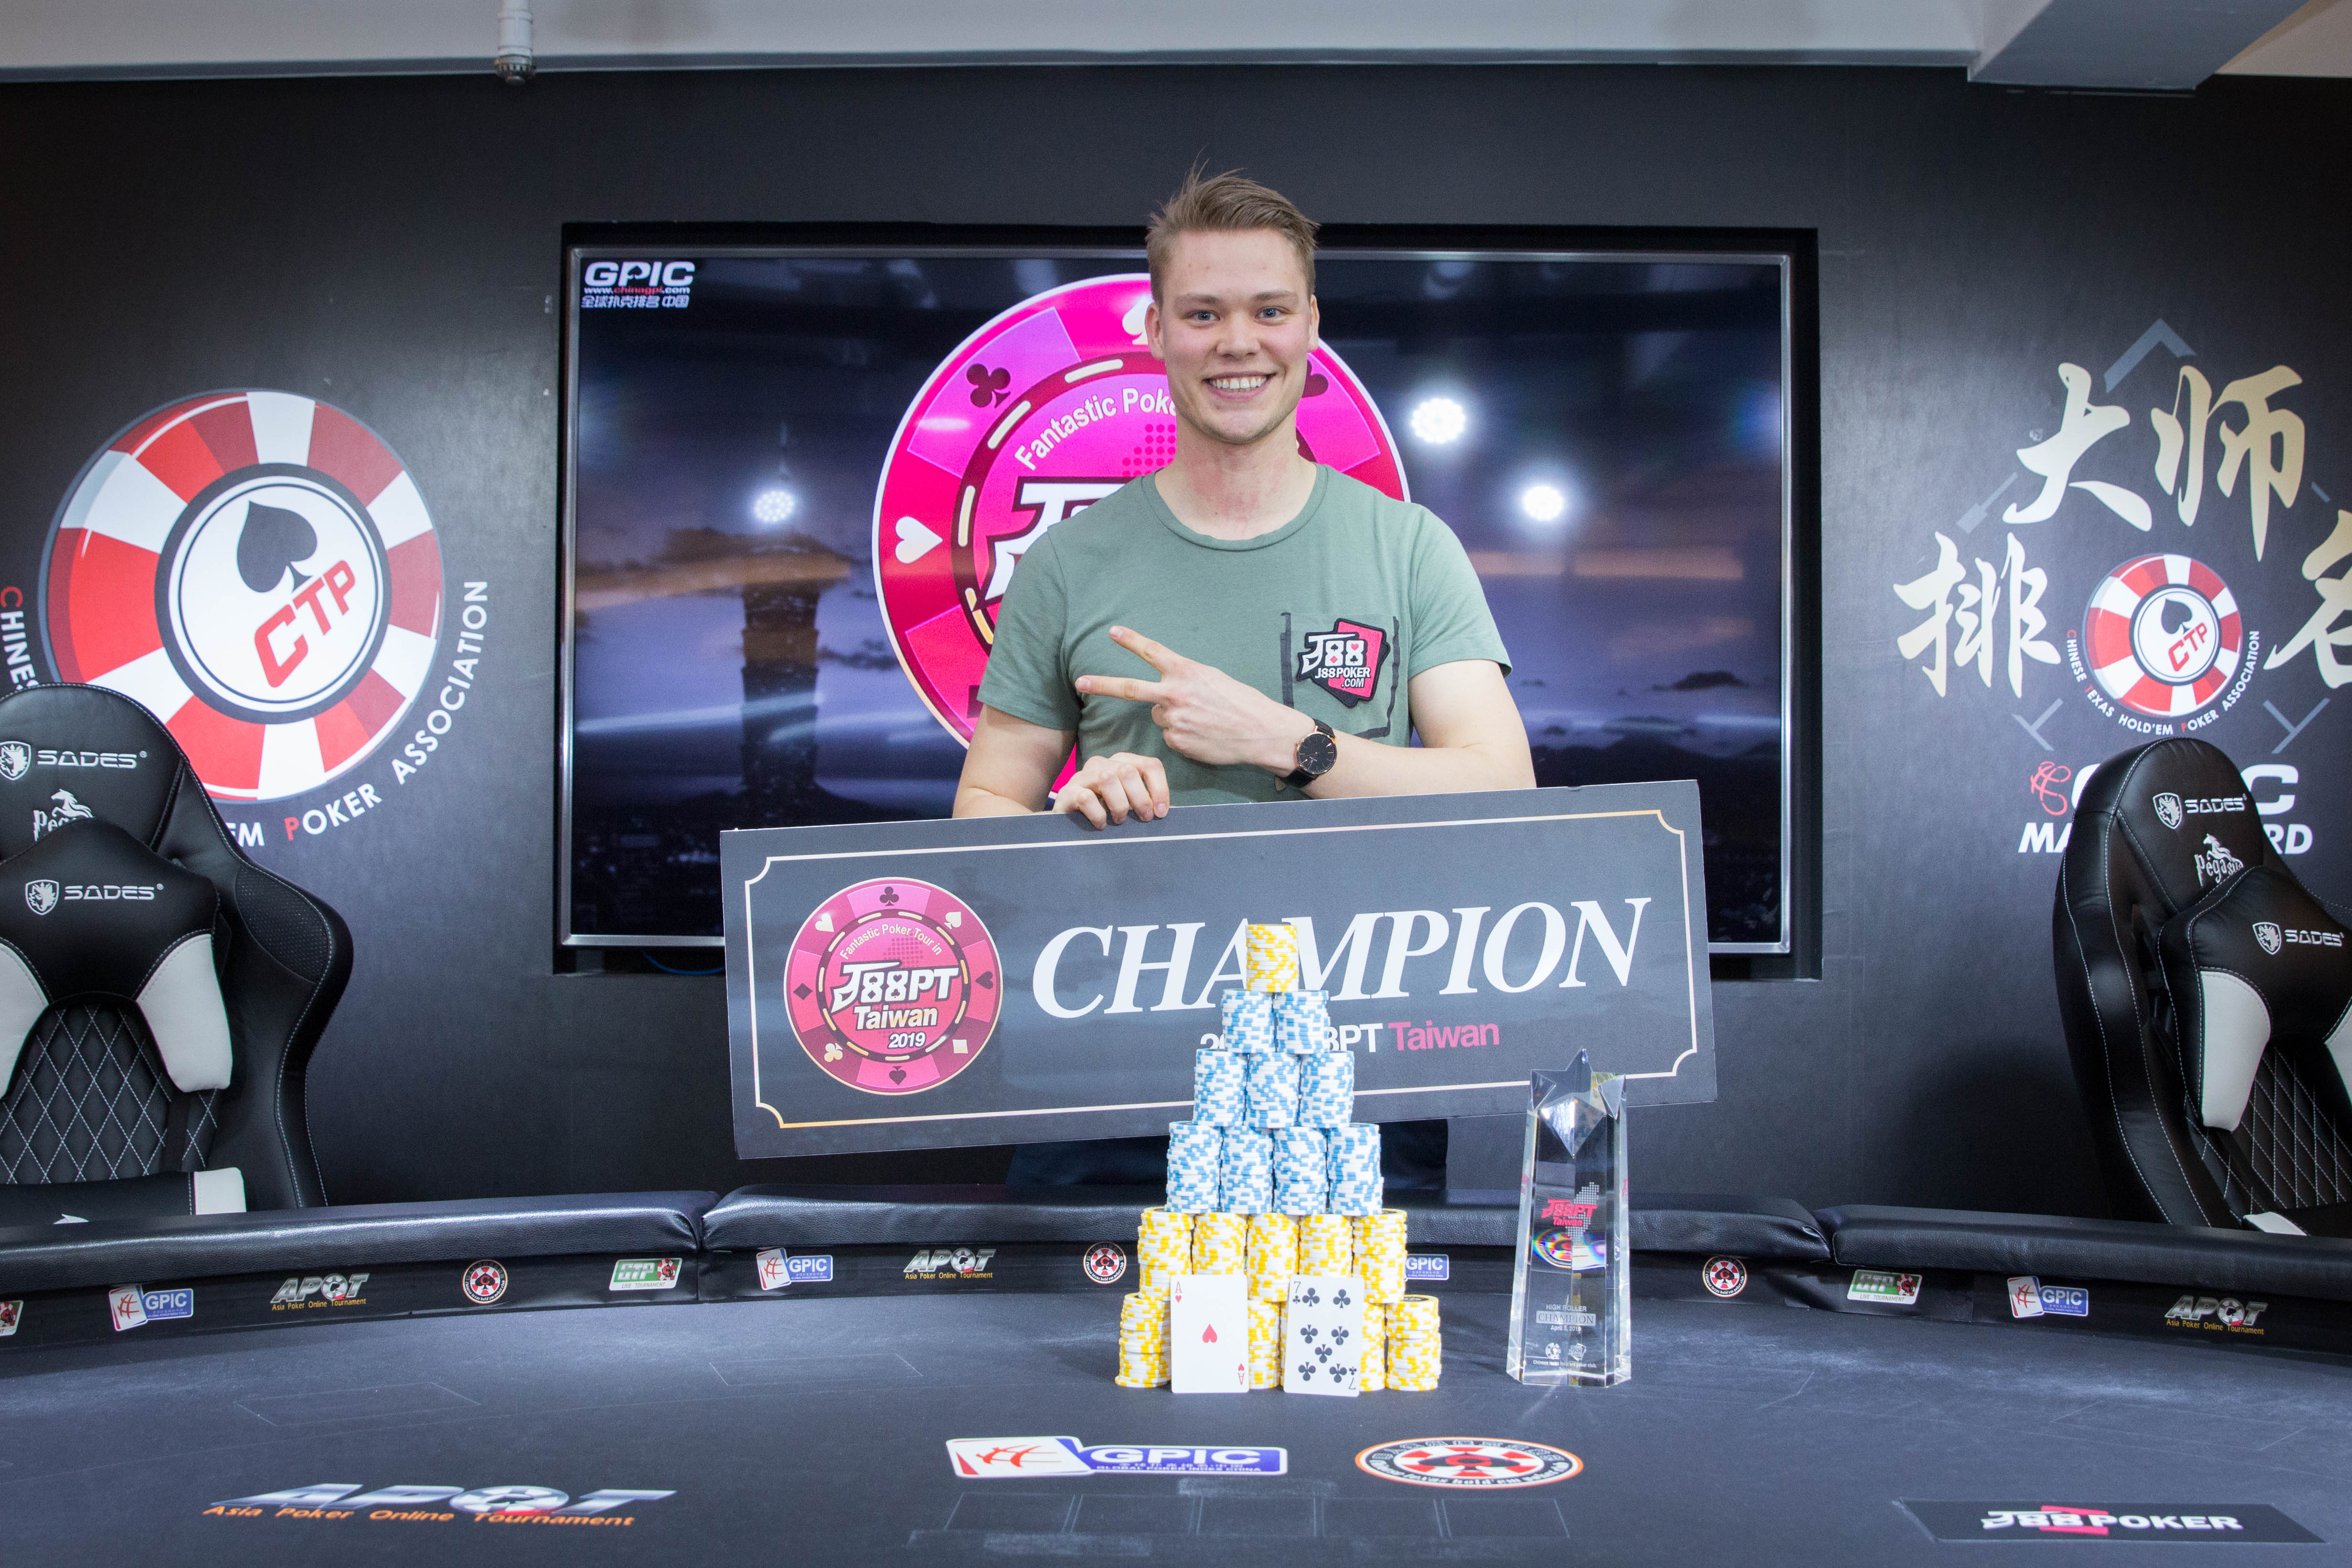 J88Poker Tour closes with high marks and Eemil Tuominen winning the High Roller